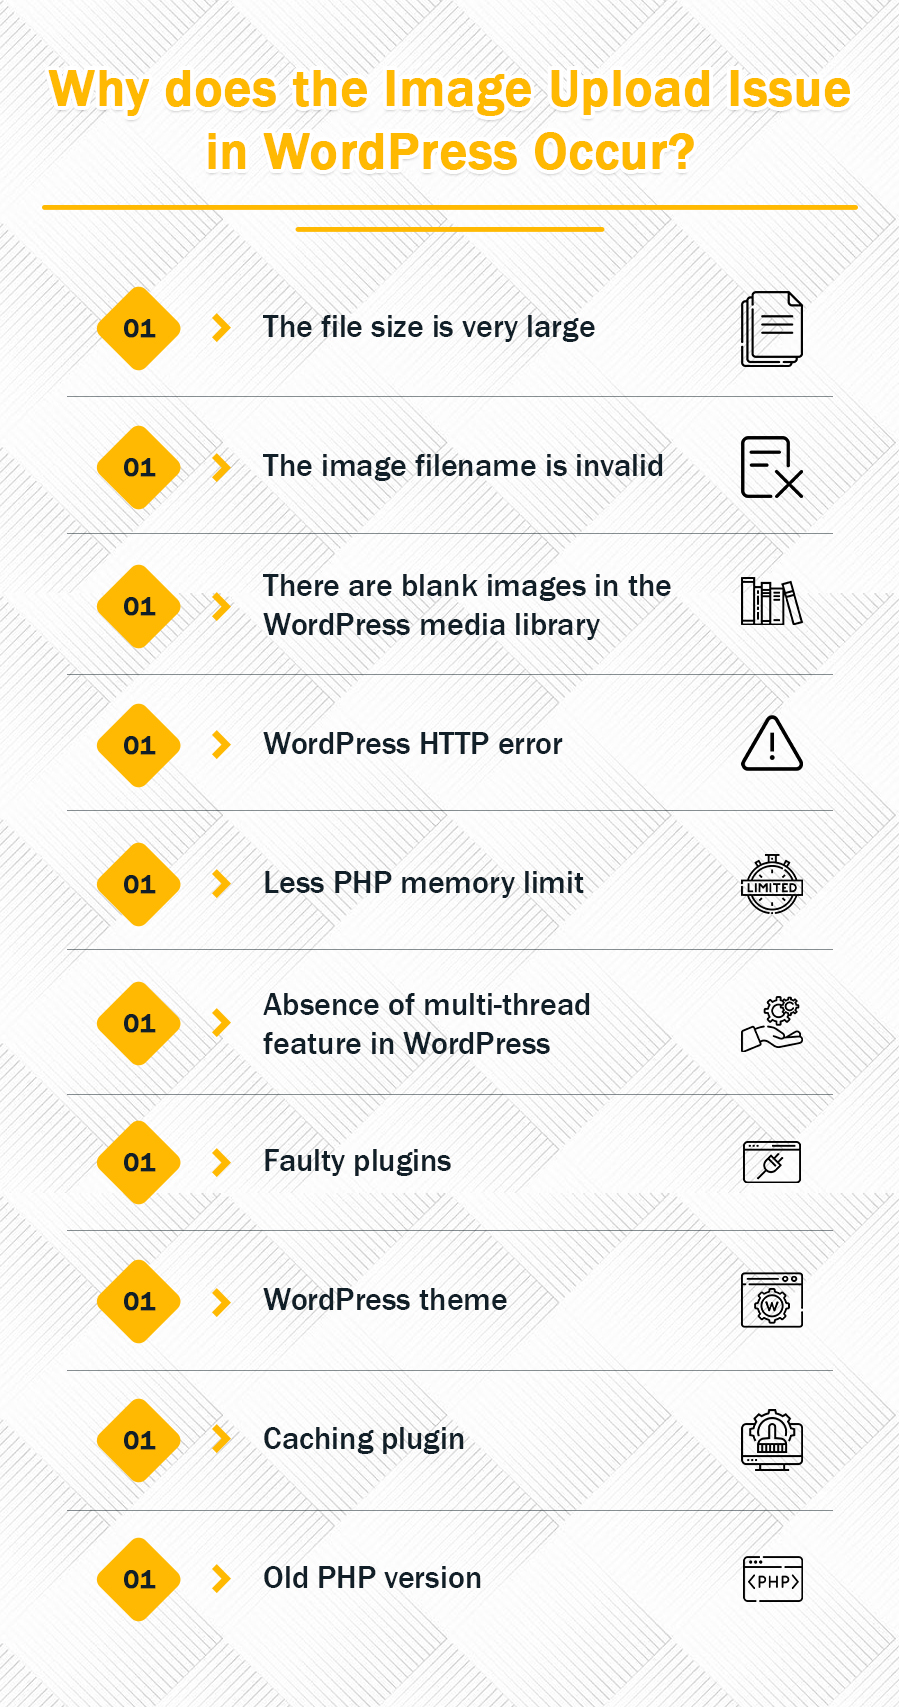 Why Does the Image Upload Issue in WordPress Occur